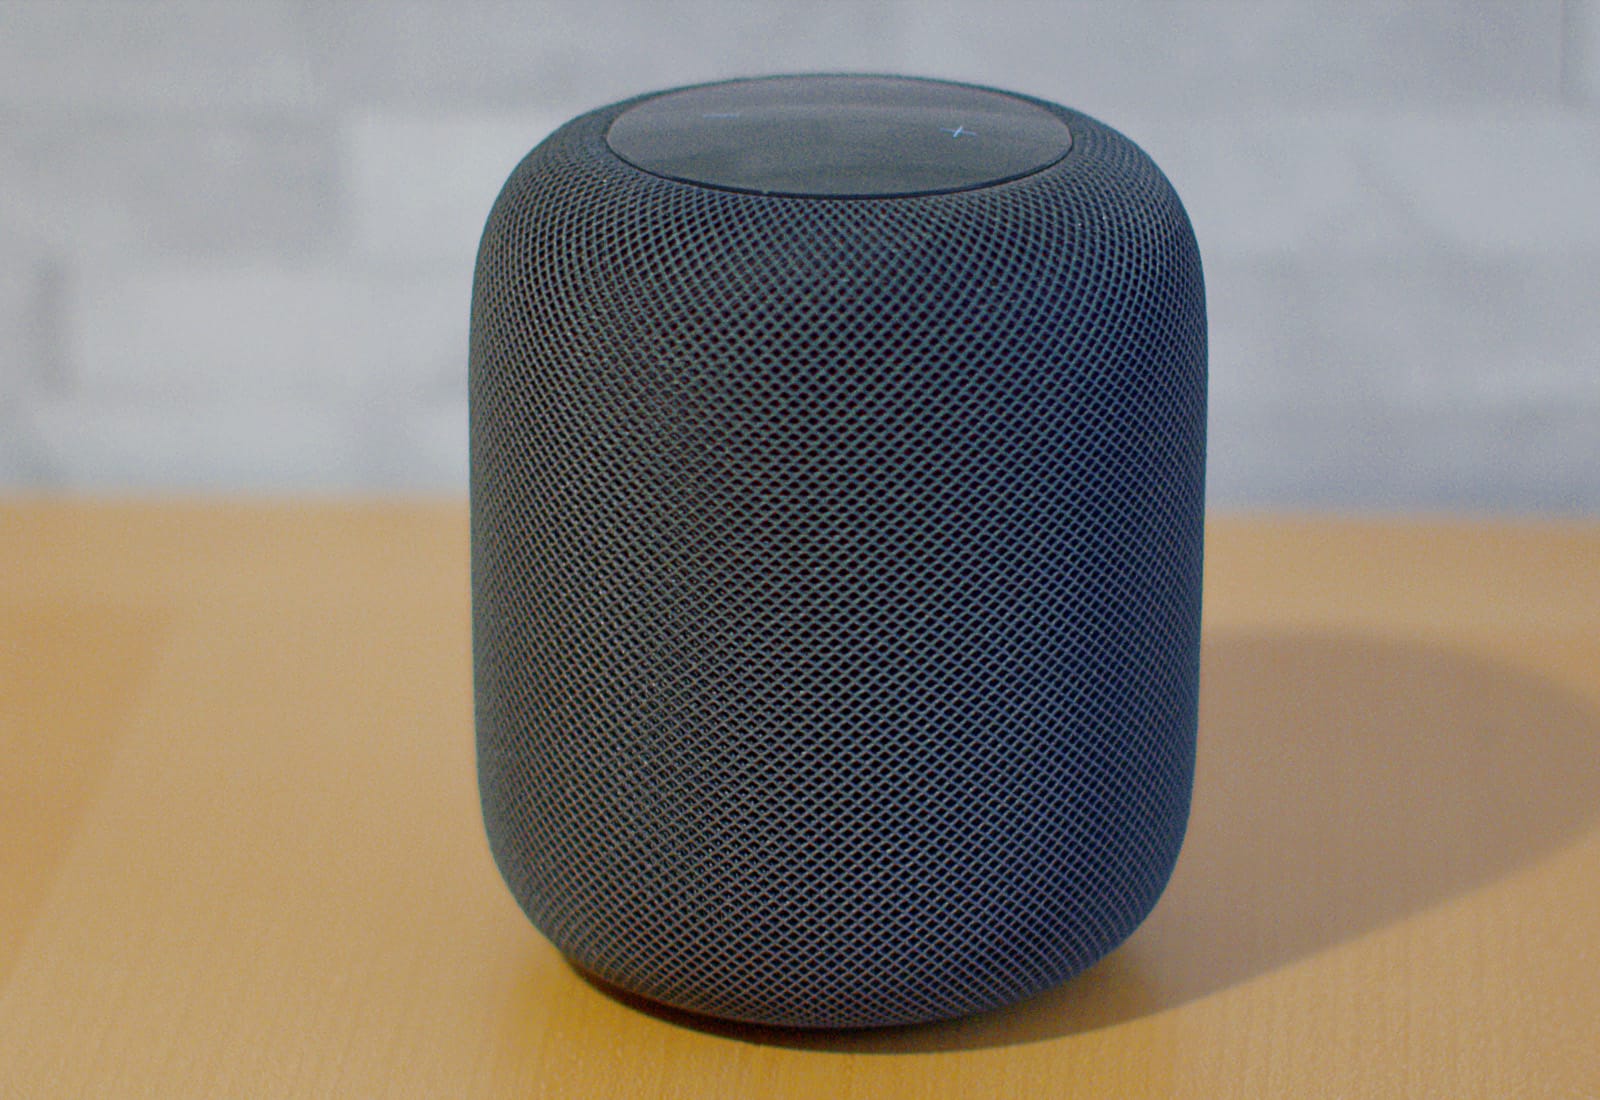 Don't take a chance on a bricked HomePod.